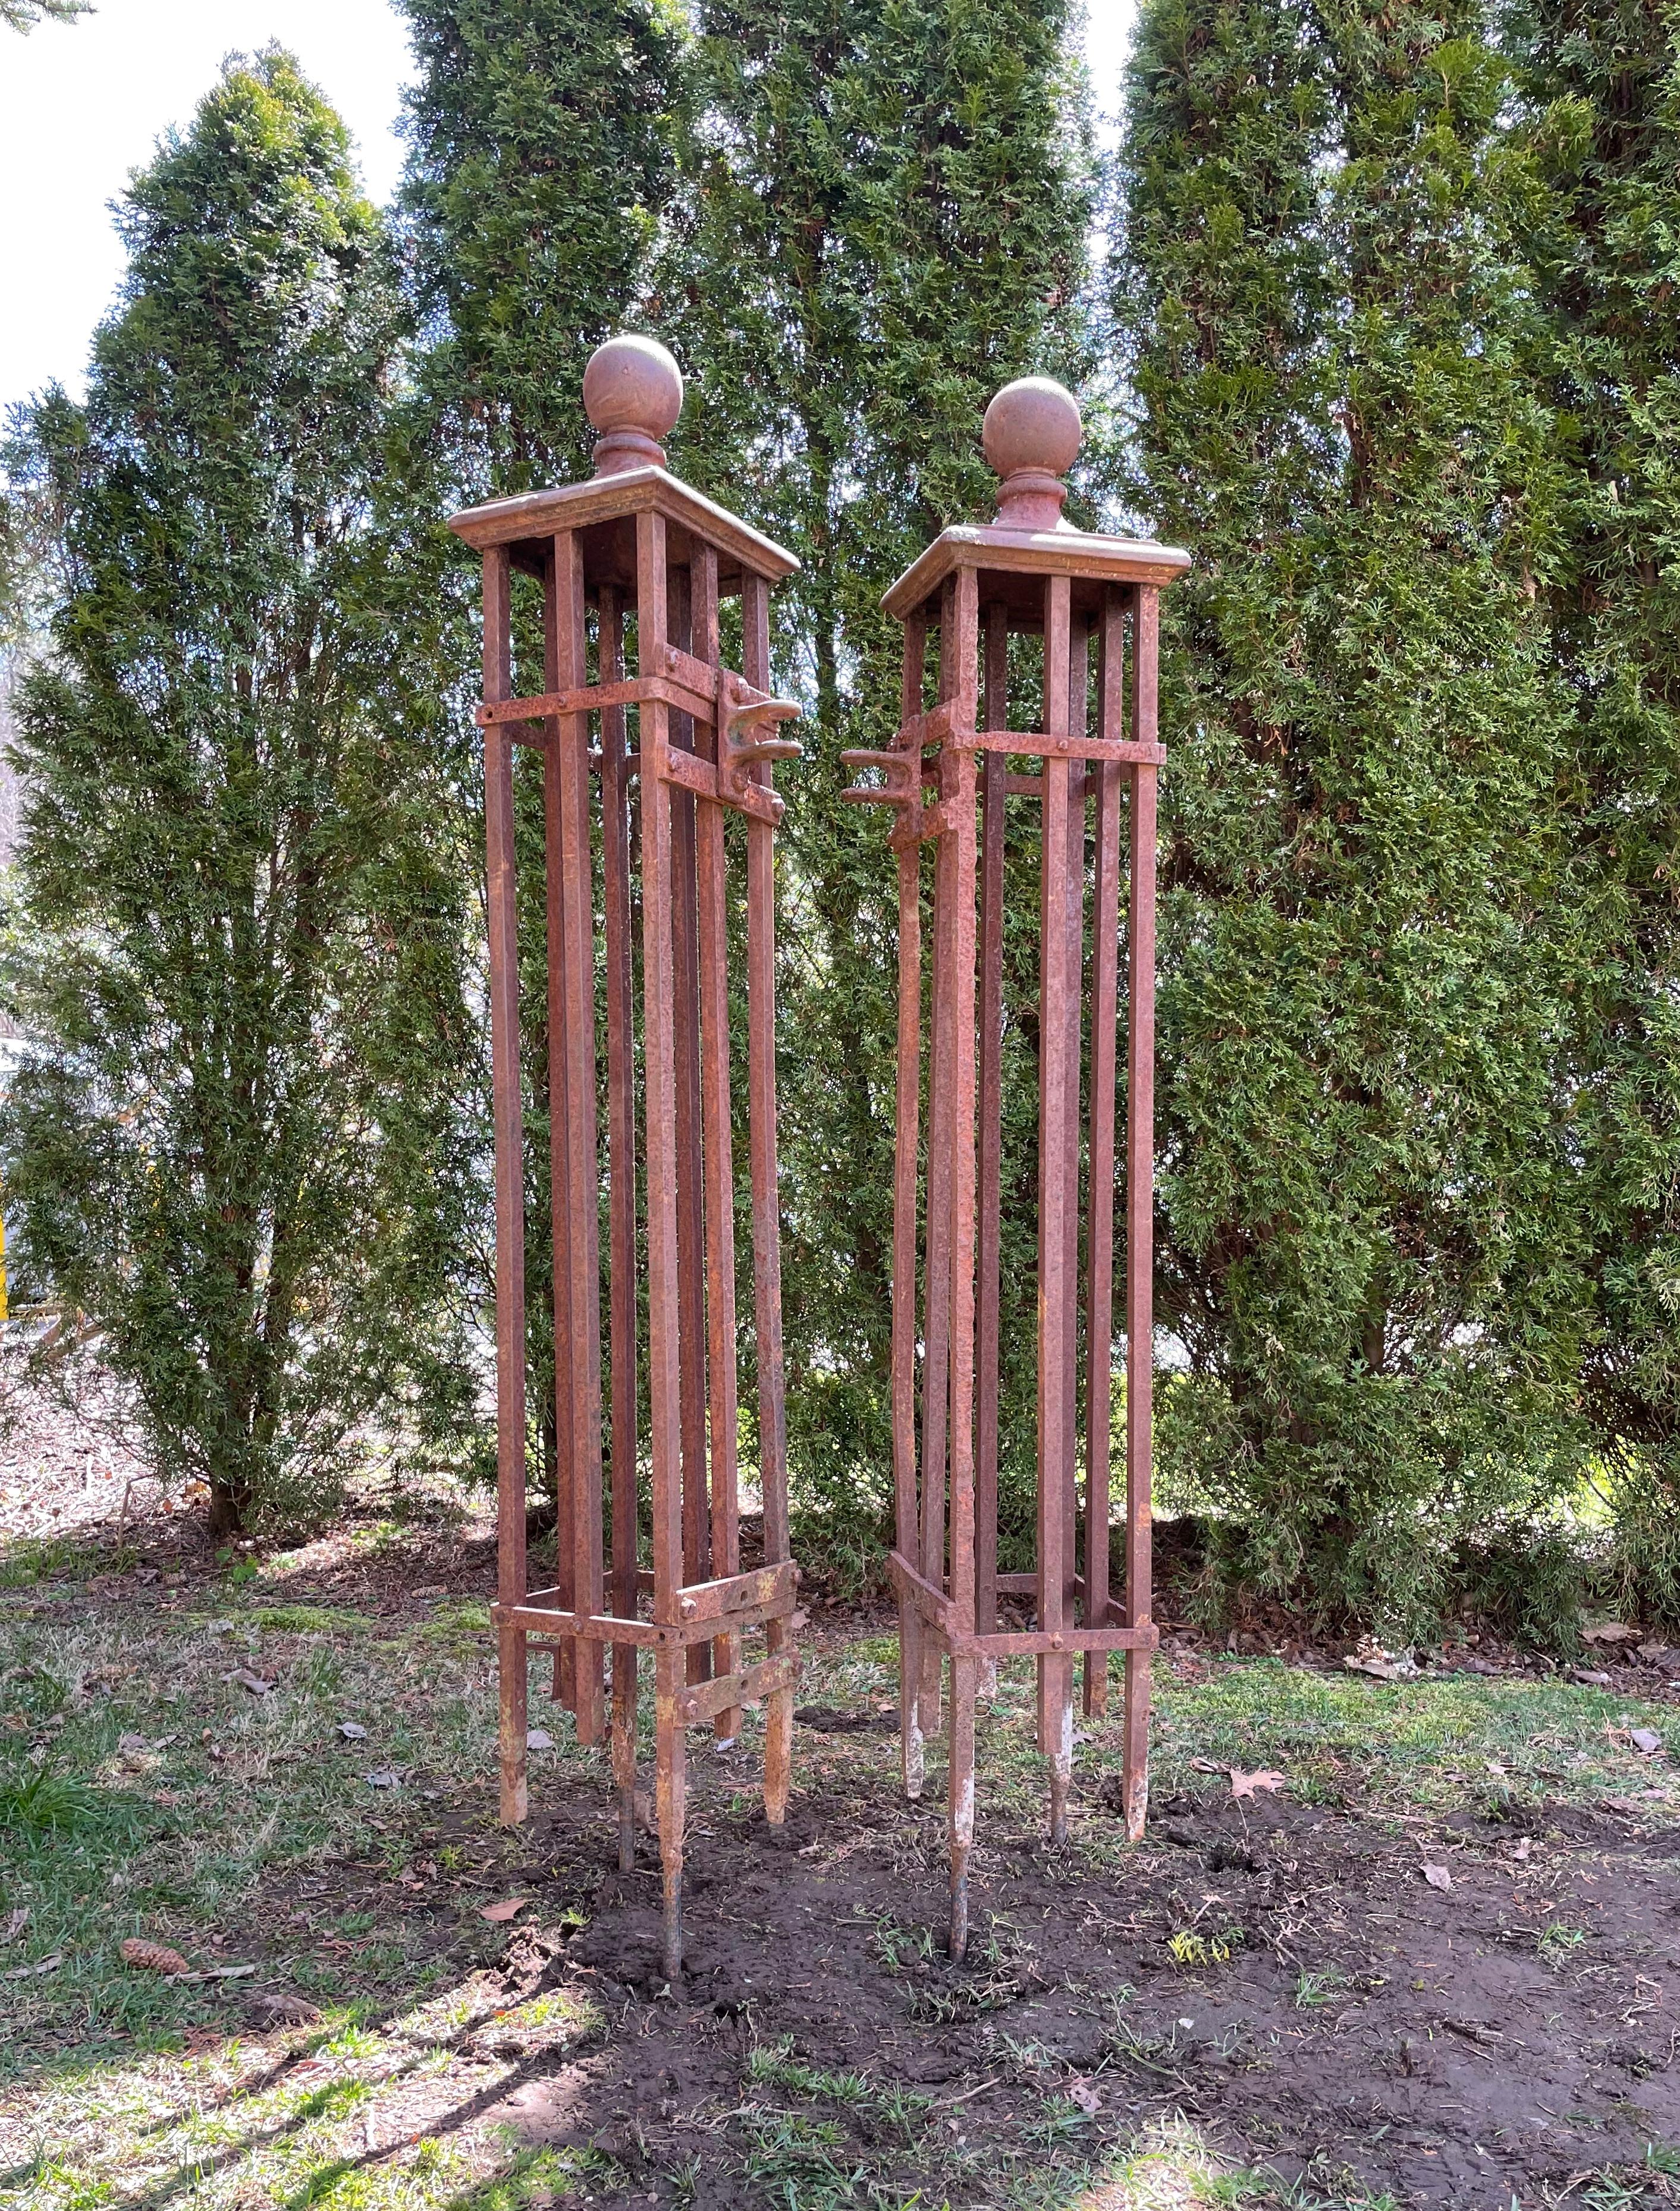 We searched long and hard for a pair of practical forms upon which we could grow sweet peas in our own potager and, years ago, happened upon these marvelous old cast and wrought iron gate piers that, with the clever assistance of our metalsmith,